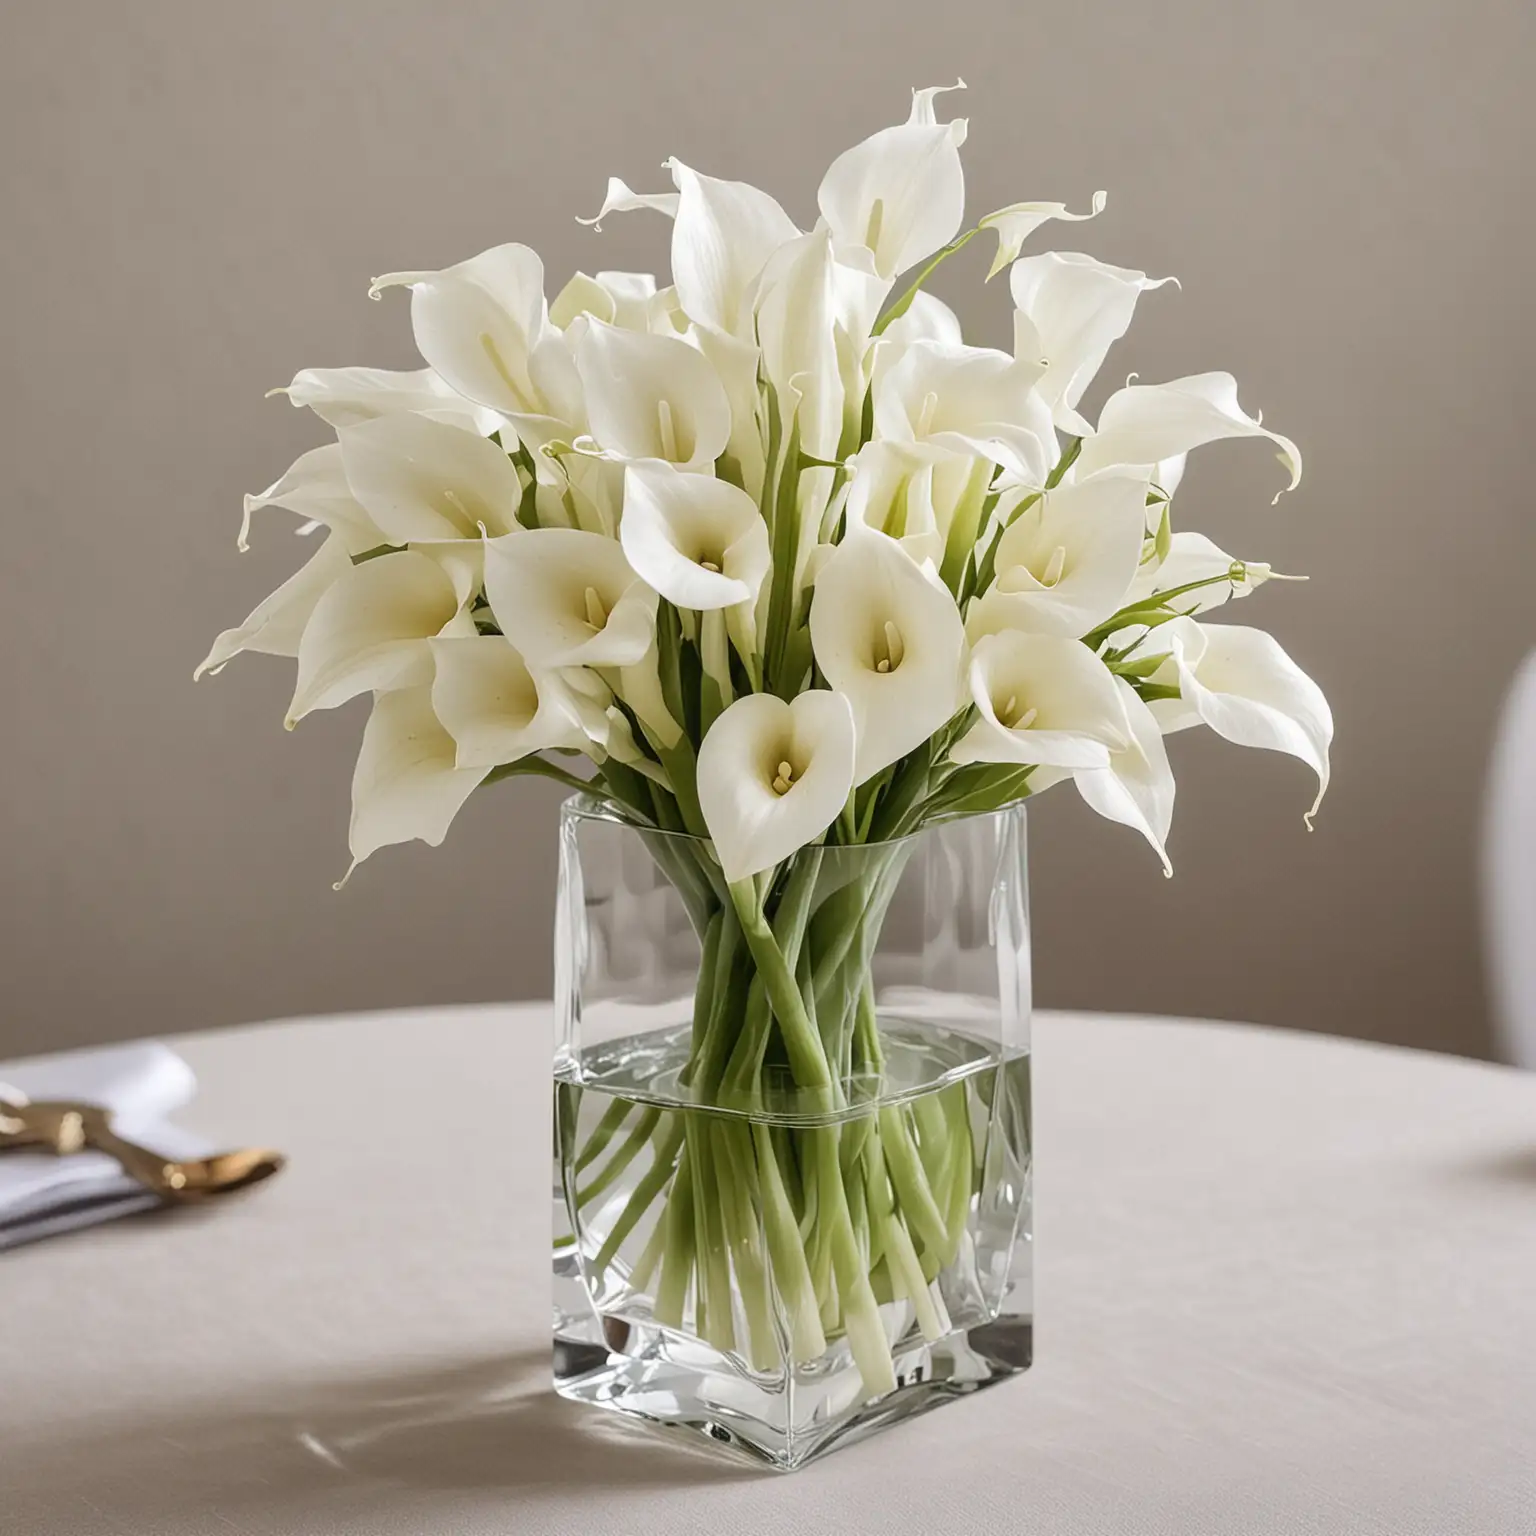 modern summer wedding centerpiece using a cleek vase that has a clear and white geometric pattern, and is filled with a small white calla lily bouquet